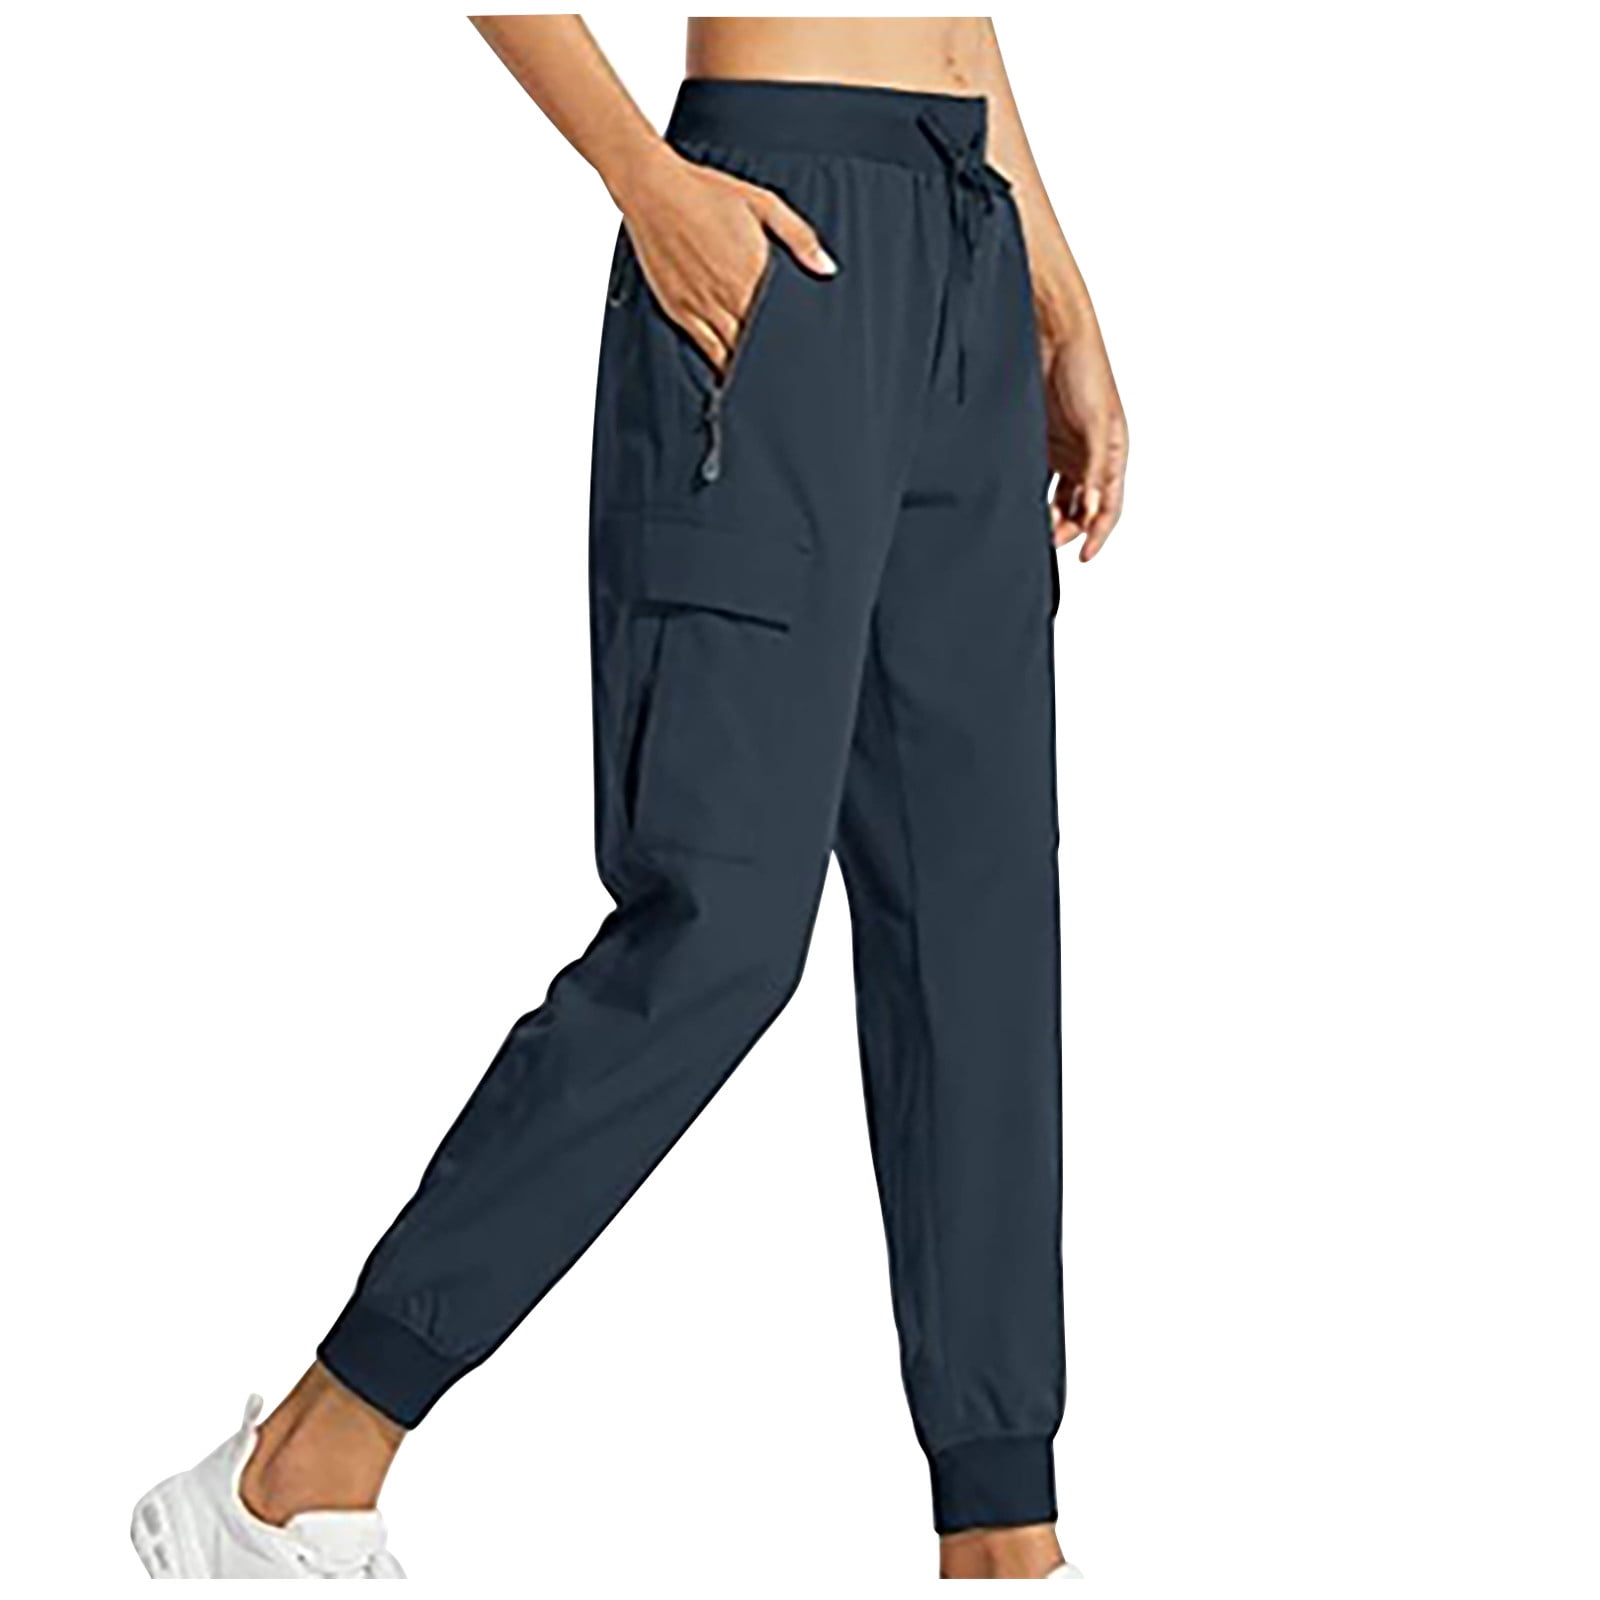 RYRJJ Women's Cargo Joggers Pant Lightweight Quick Dry Hiking Pants  Athletic Workout Lounge Casual Outdoor Track Sweatpants with Zipper